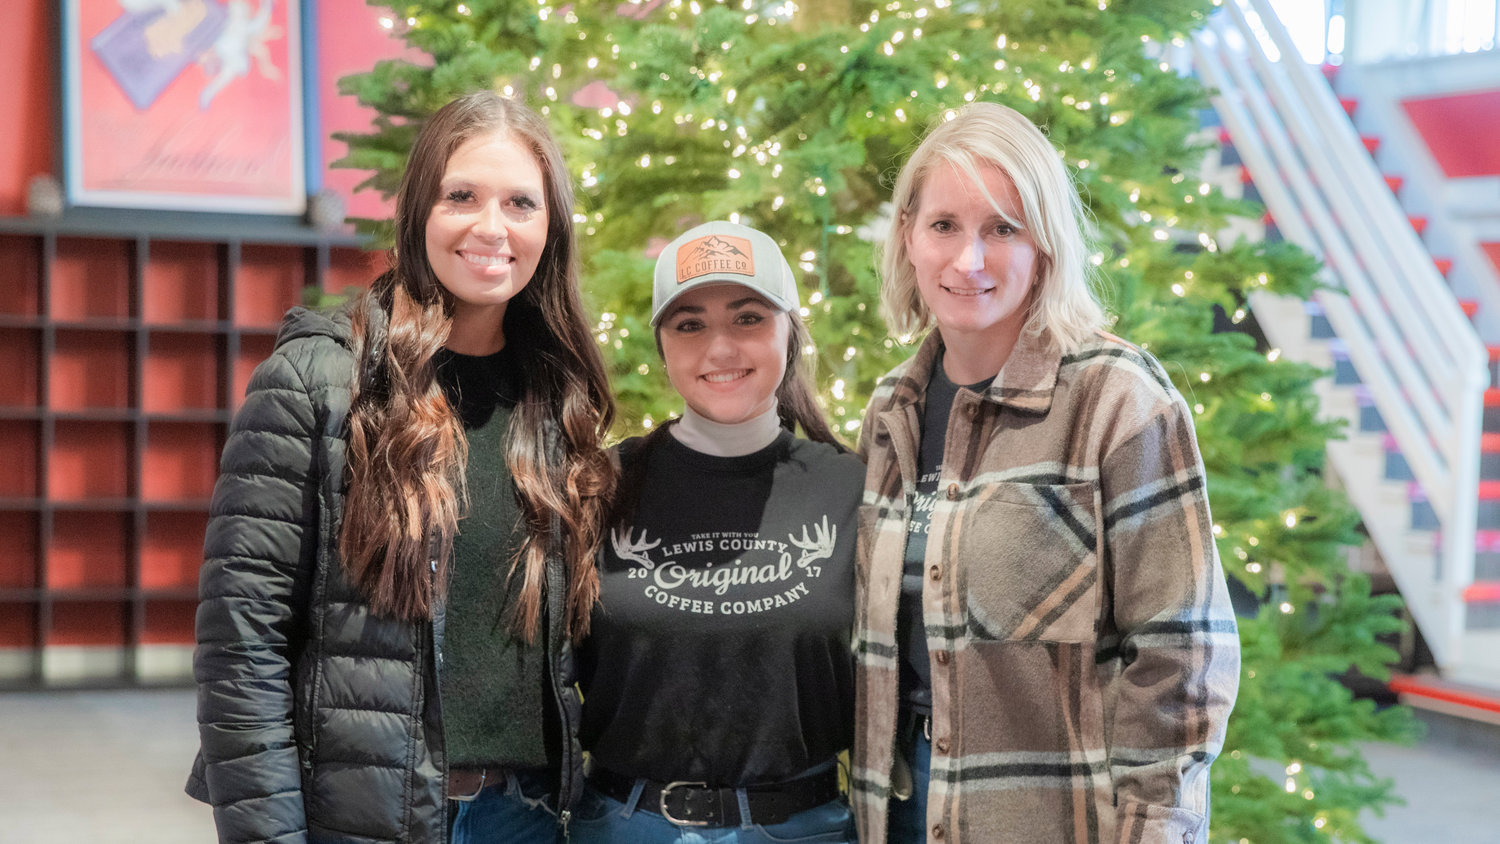 From left, Angie Twining, Cheyenne Sanford and Sam Magnuson with Lewis County Coffee Co. smile for a photo at The Station in Centralia Wednesday morning.